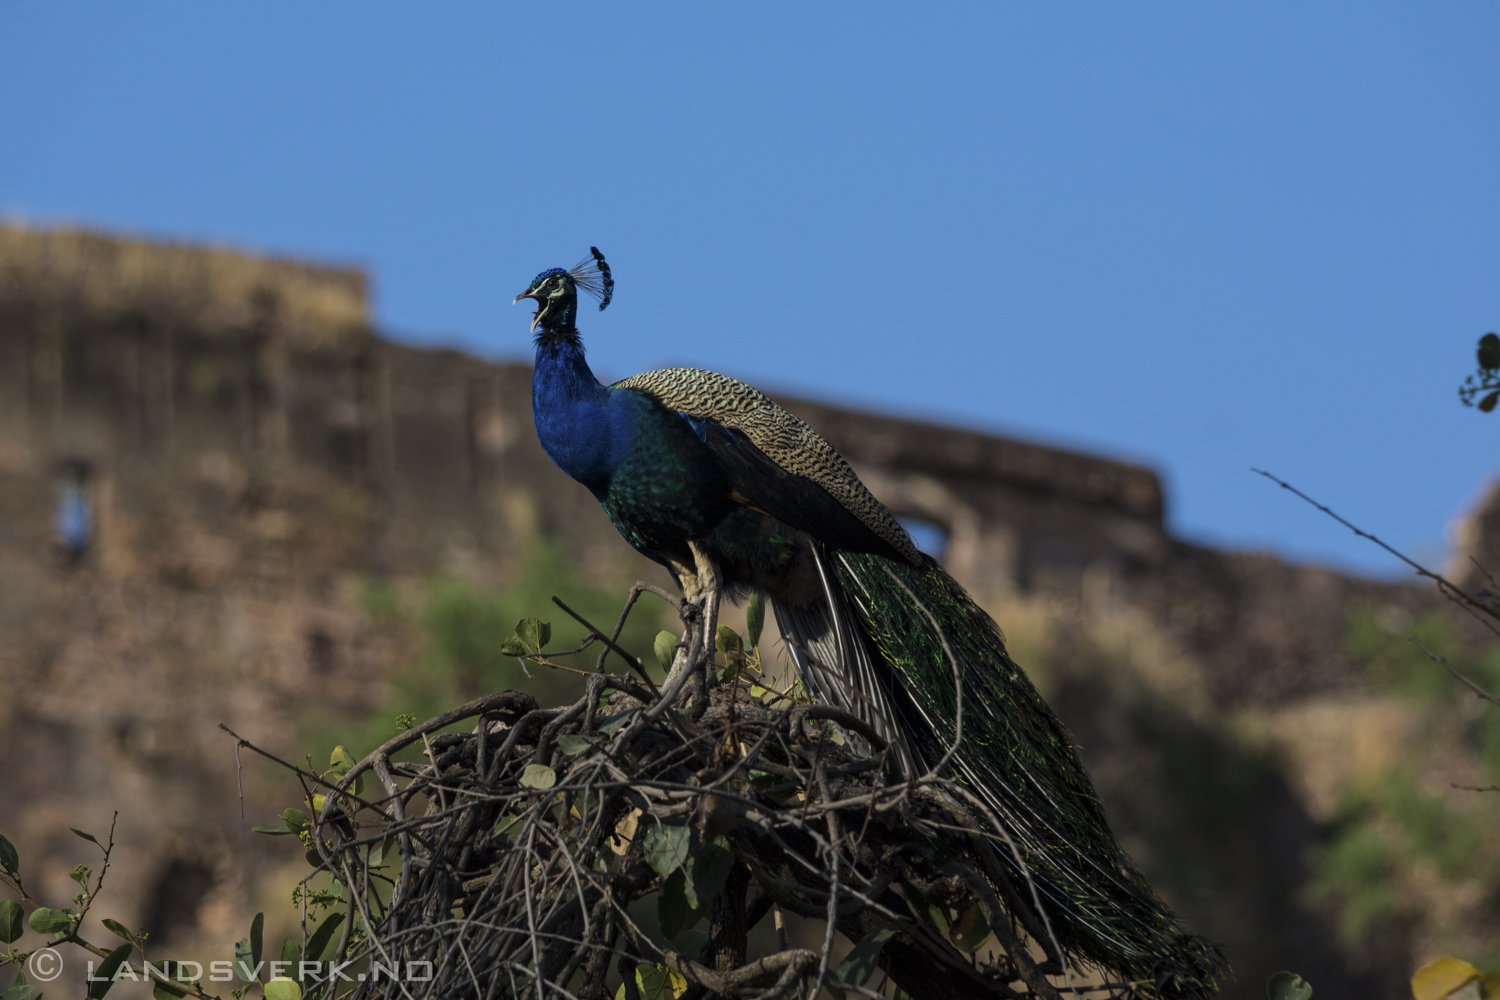 Wild peacock. Ranthambore National Park, India. 

(Canon EOS 5D Mark III / Canon EF 70-200mm f/2.8 L IS II USM / Canon 2x EF Extender III)